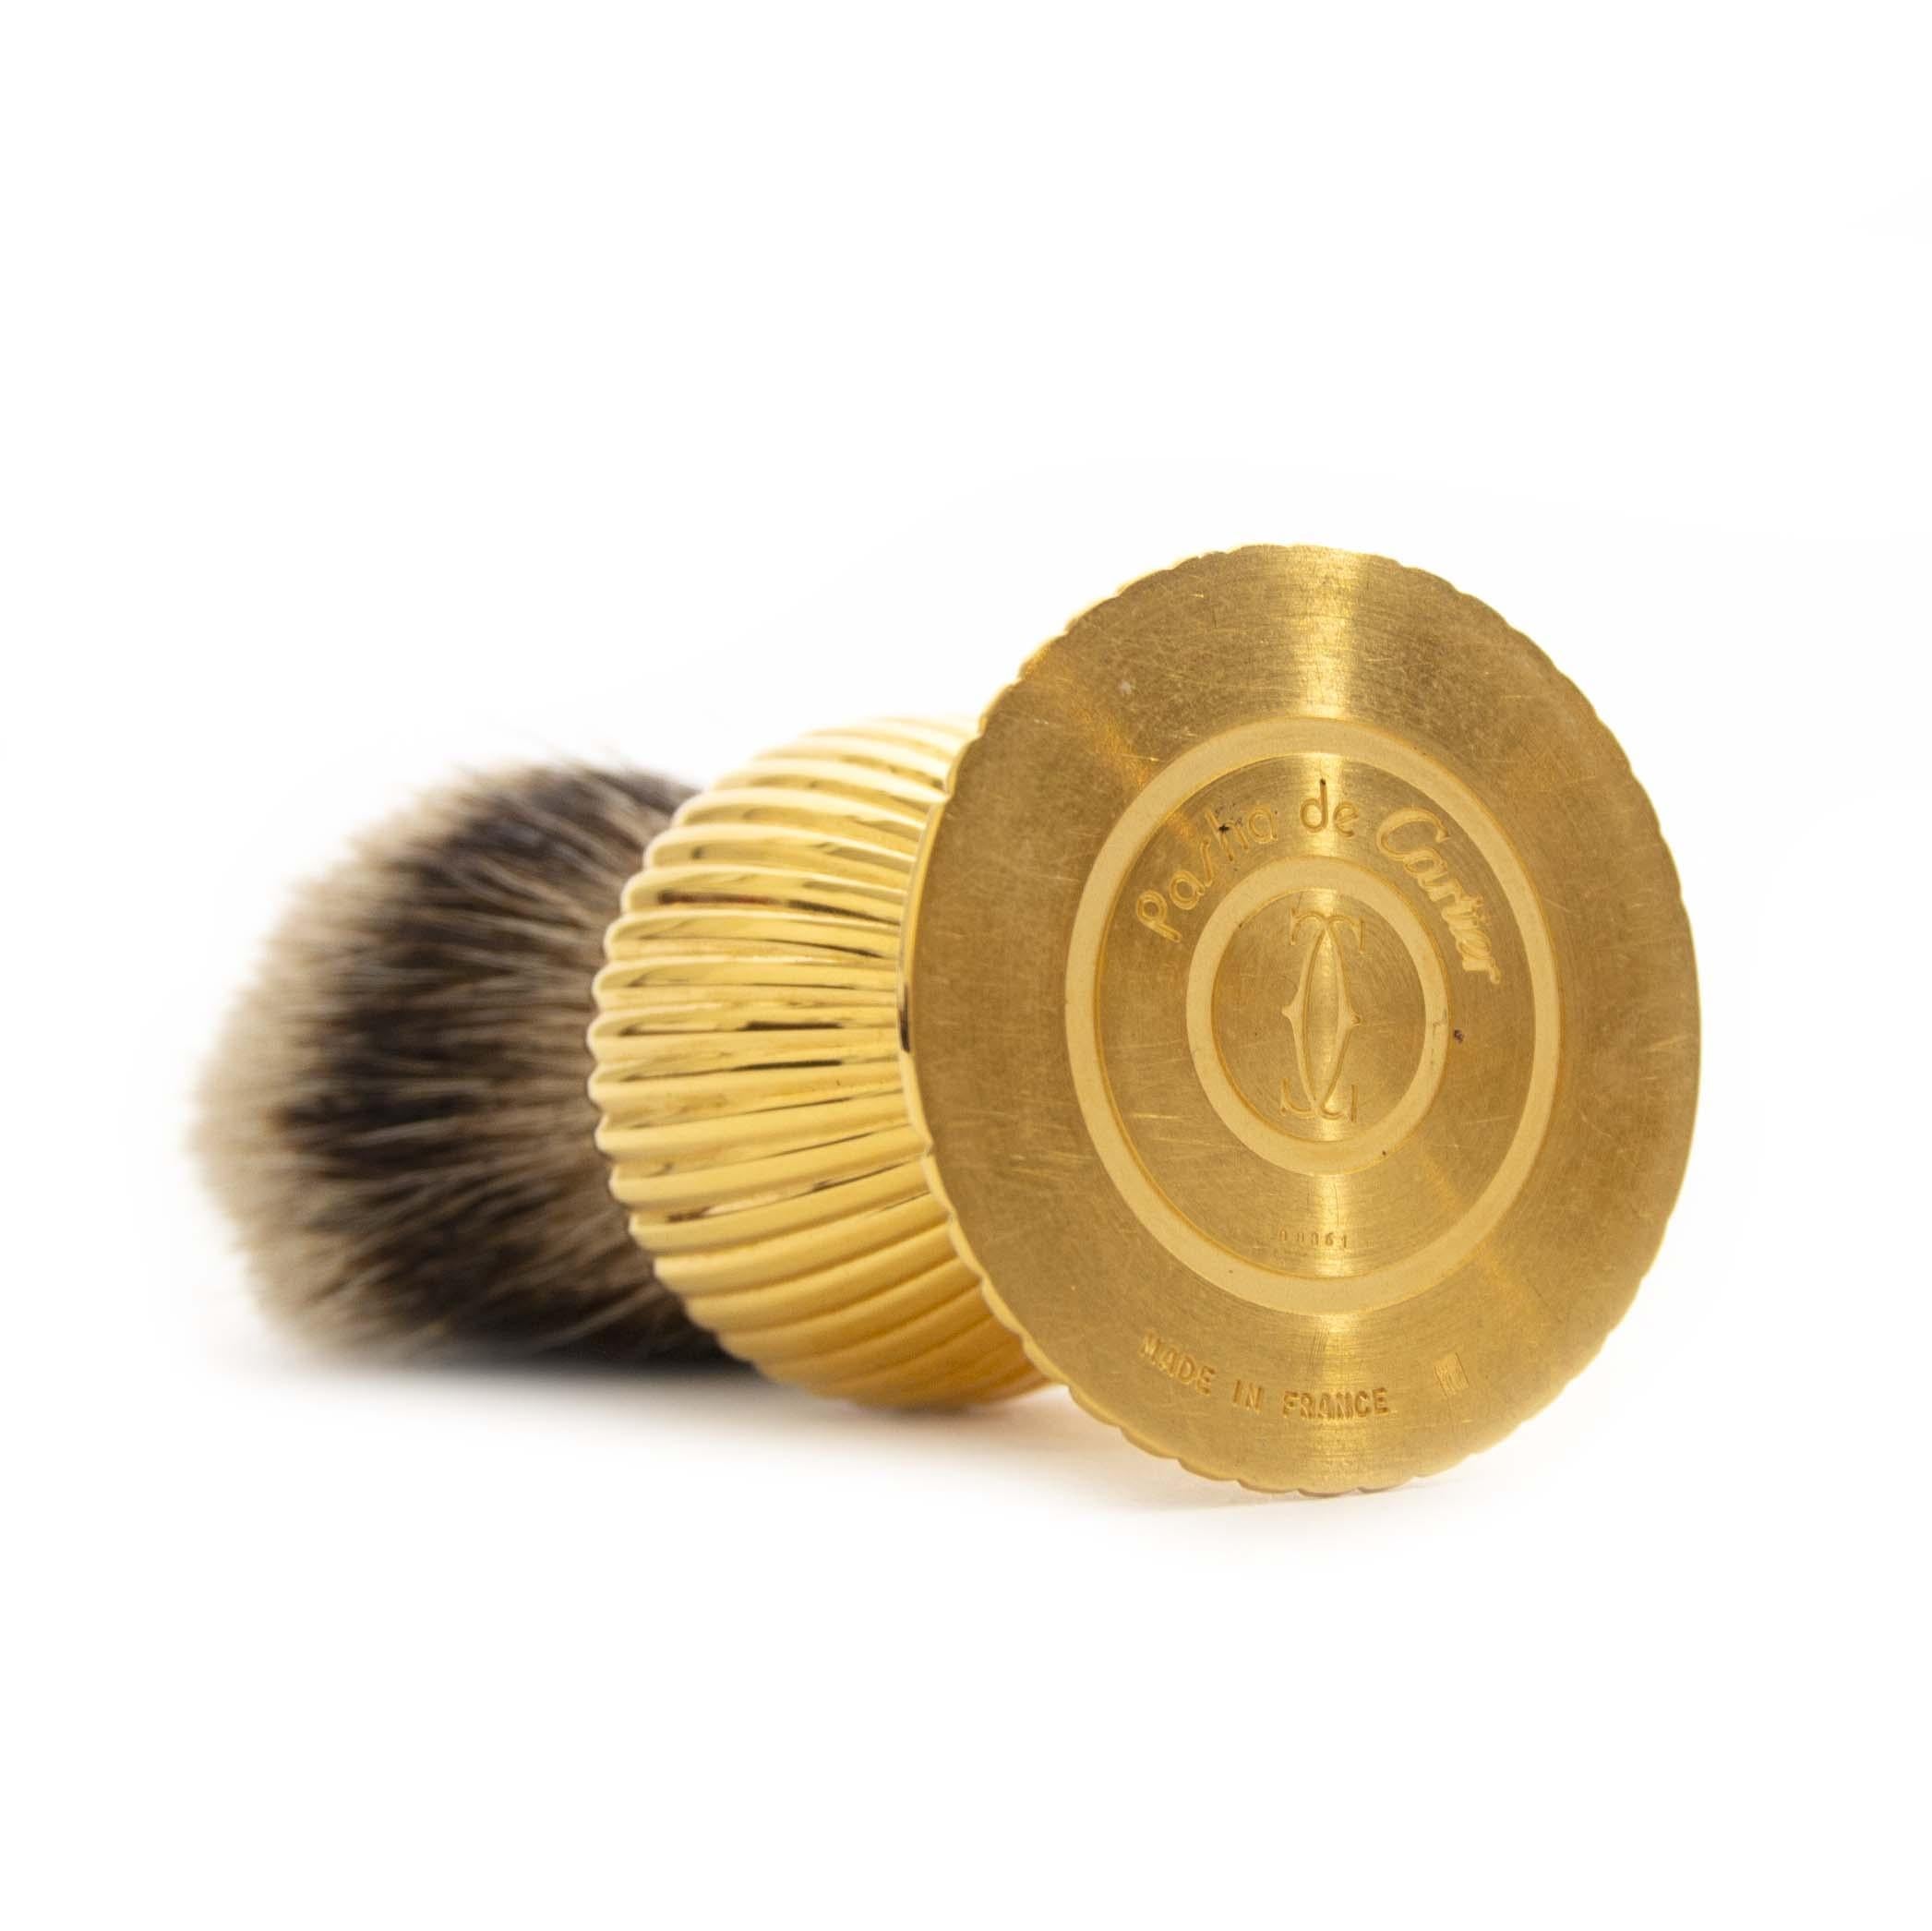 Very good condition

Cartier Pasha de Cartier Shaving Set

This Cartier shaving set is an absolute unique must have for your bathroom. This set comes with a shaving brush and a razor that is 18K and 24K gold-plated.

Comes with:

booklet